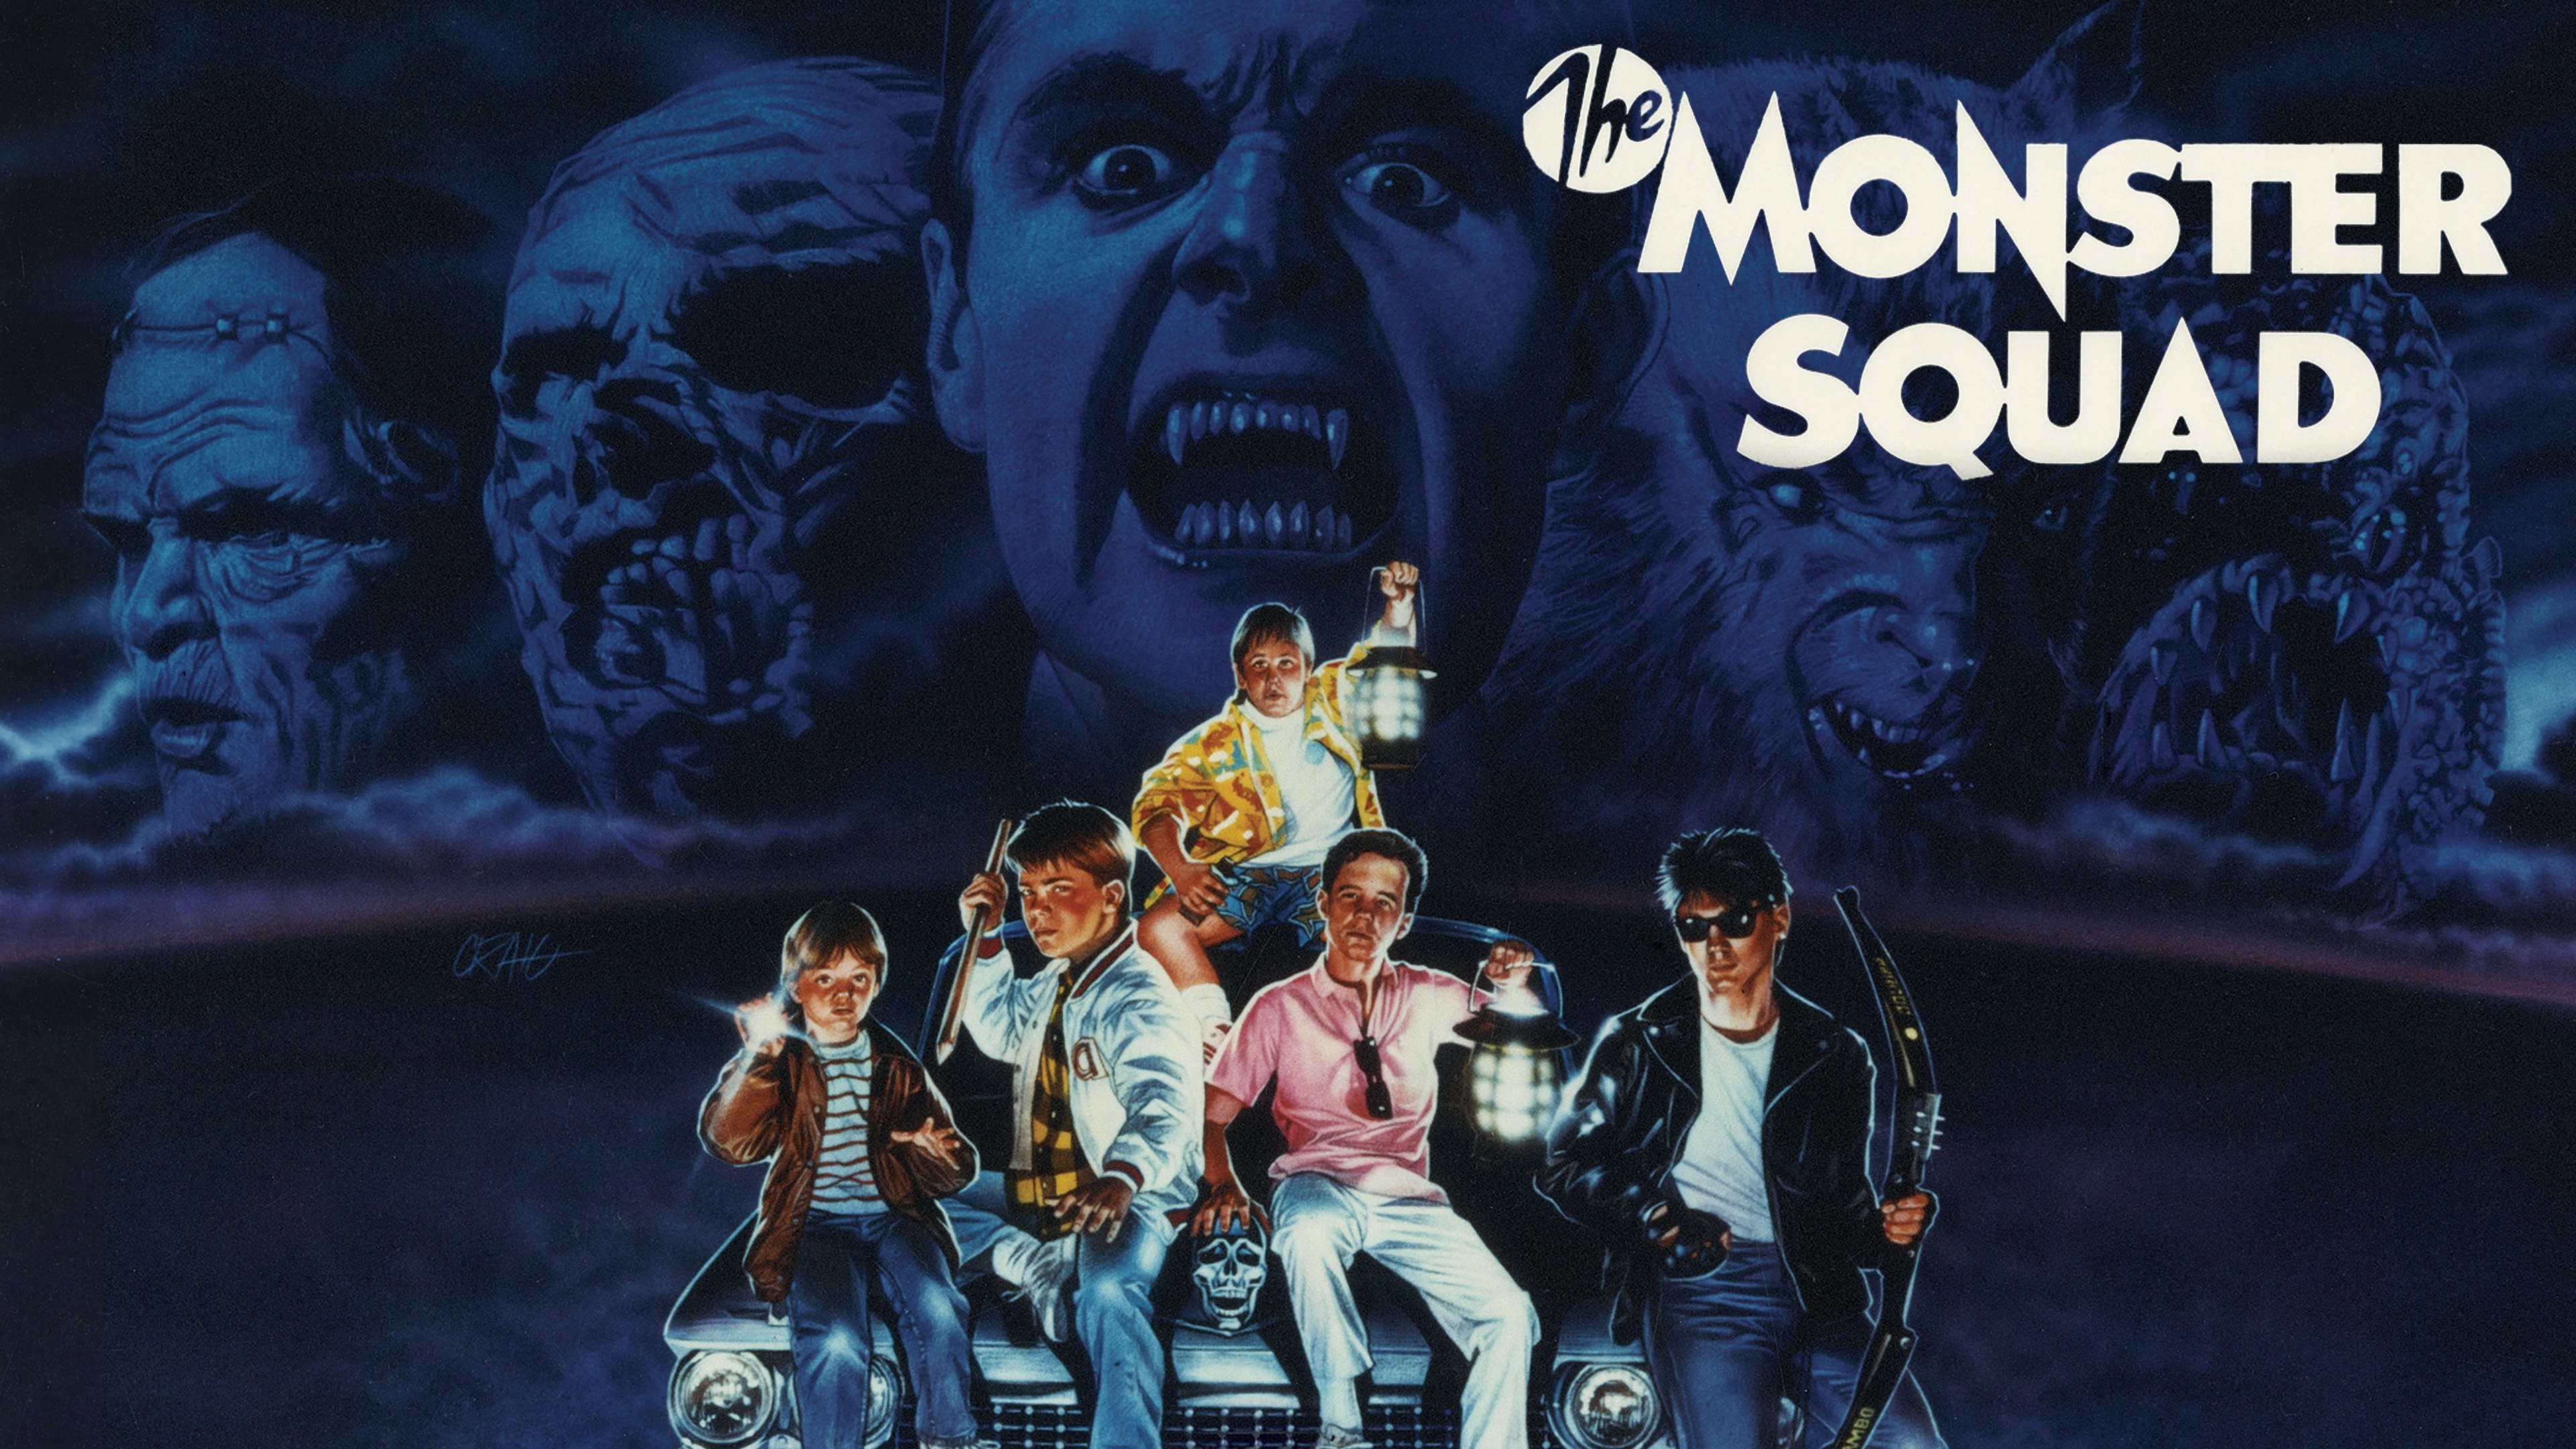 The Monster Squad - Wikipedia